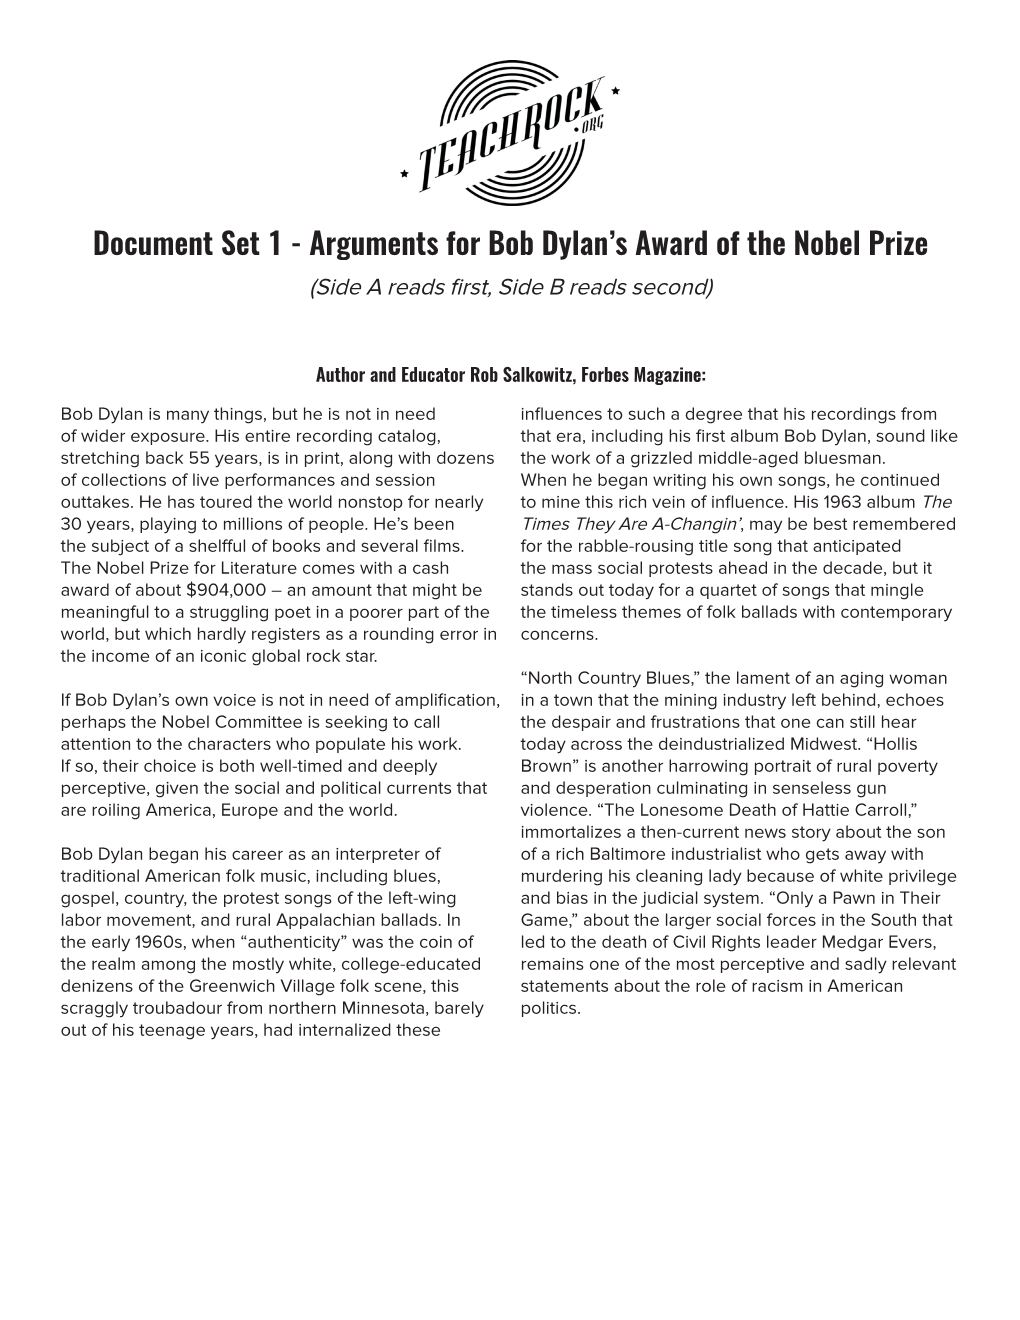 Document Set 1 - Arguments for Bob Dylan’S Award of the Nobel Prize (Side a Reads First, Side B Reads Second)